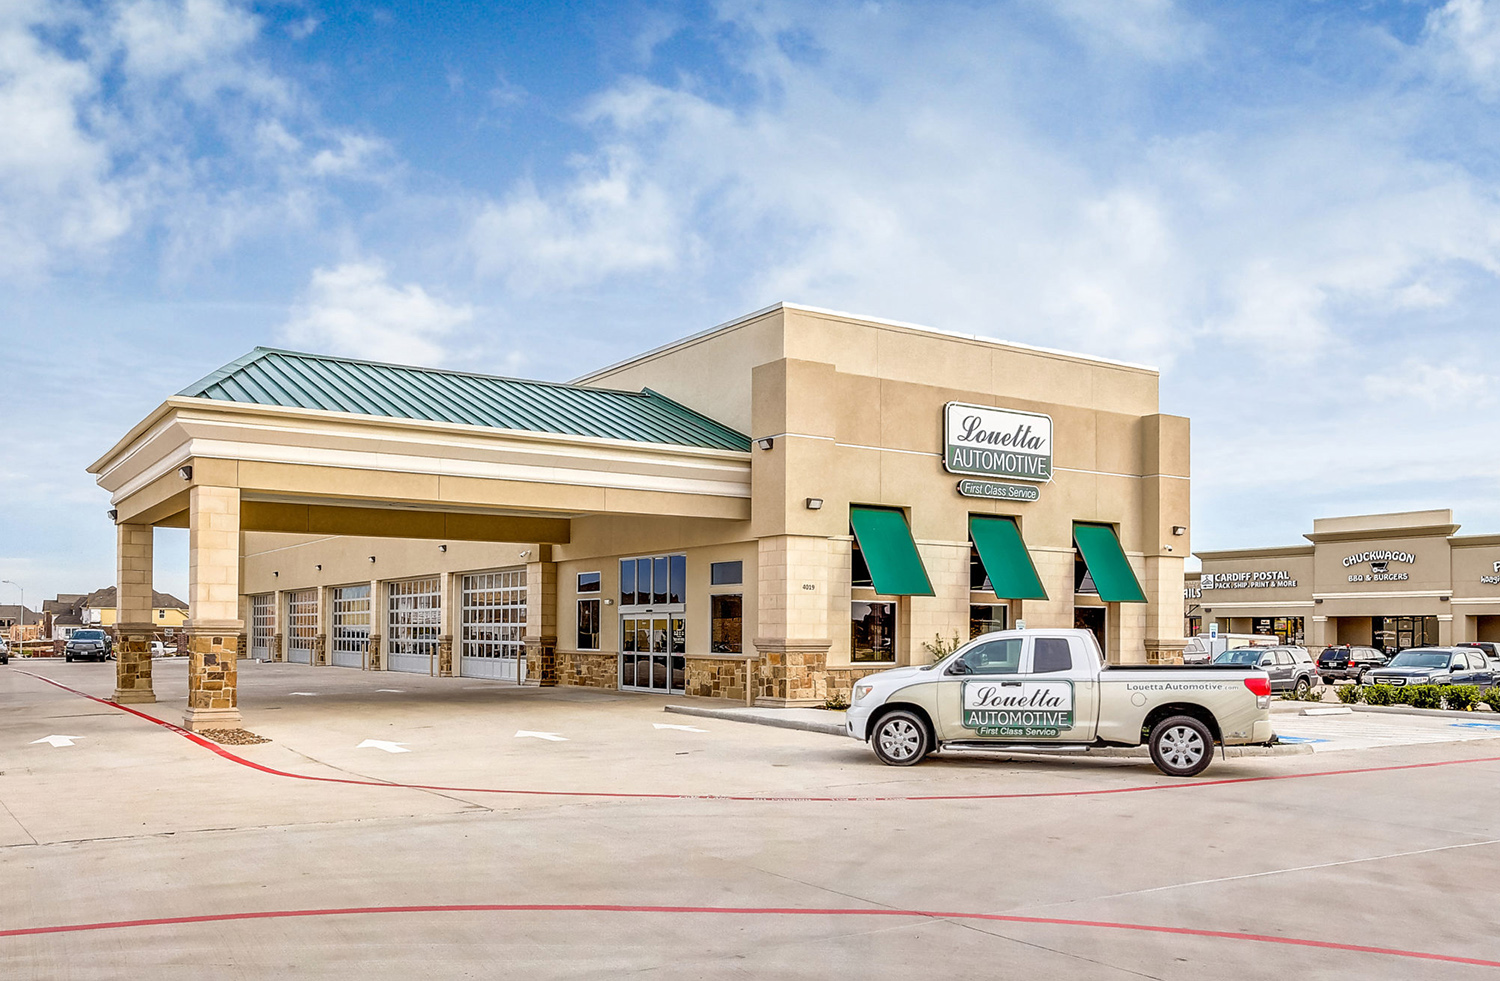 Hanley Investment Group Arranges Sales of Eight Single-Tenant Louetta Automotive and Tire Service Investments in Texas for $21 Million